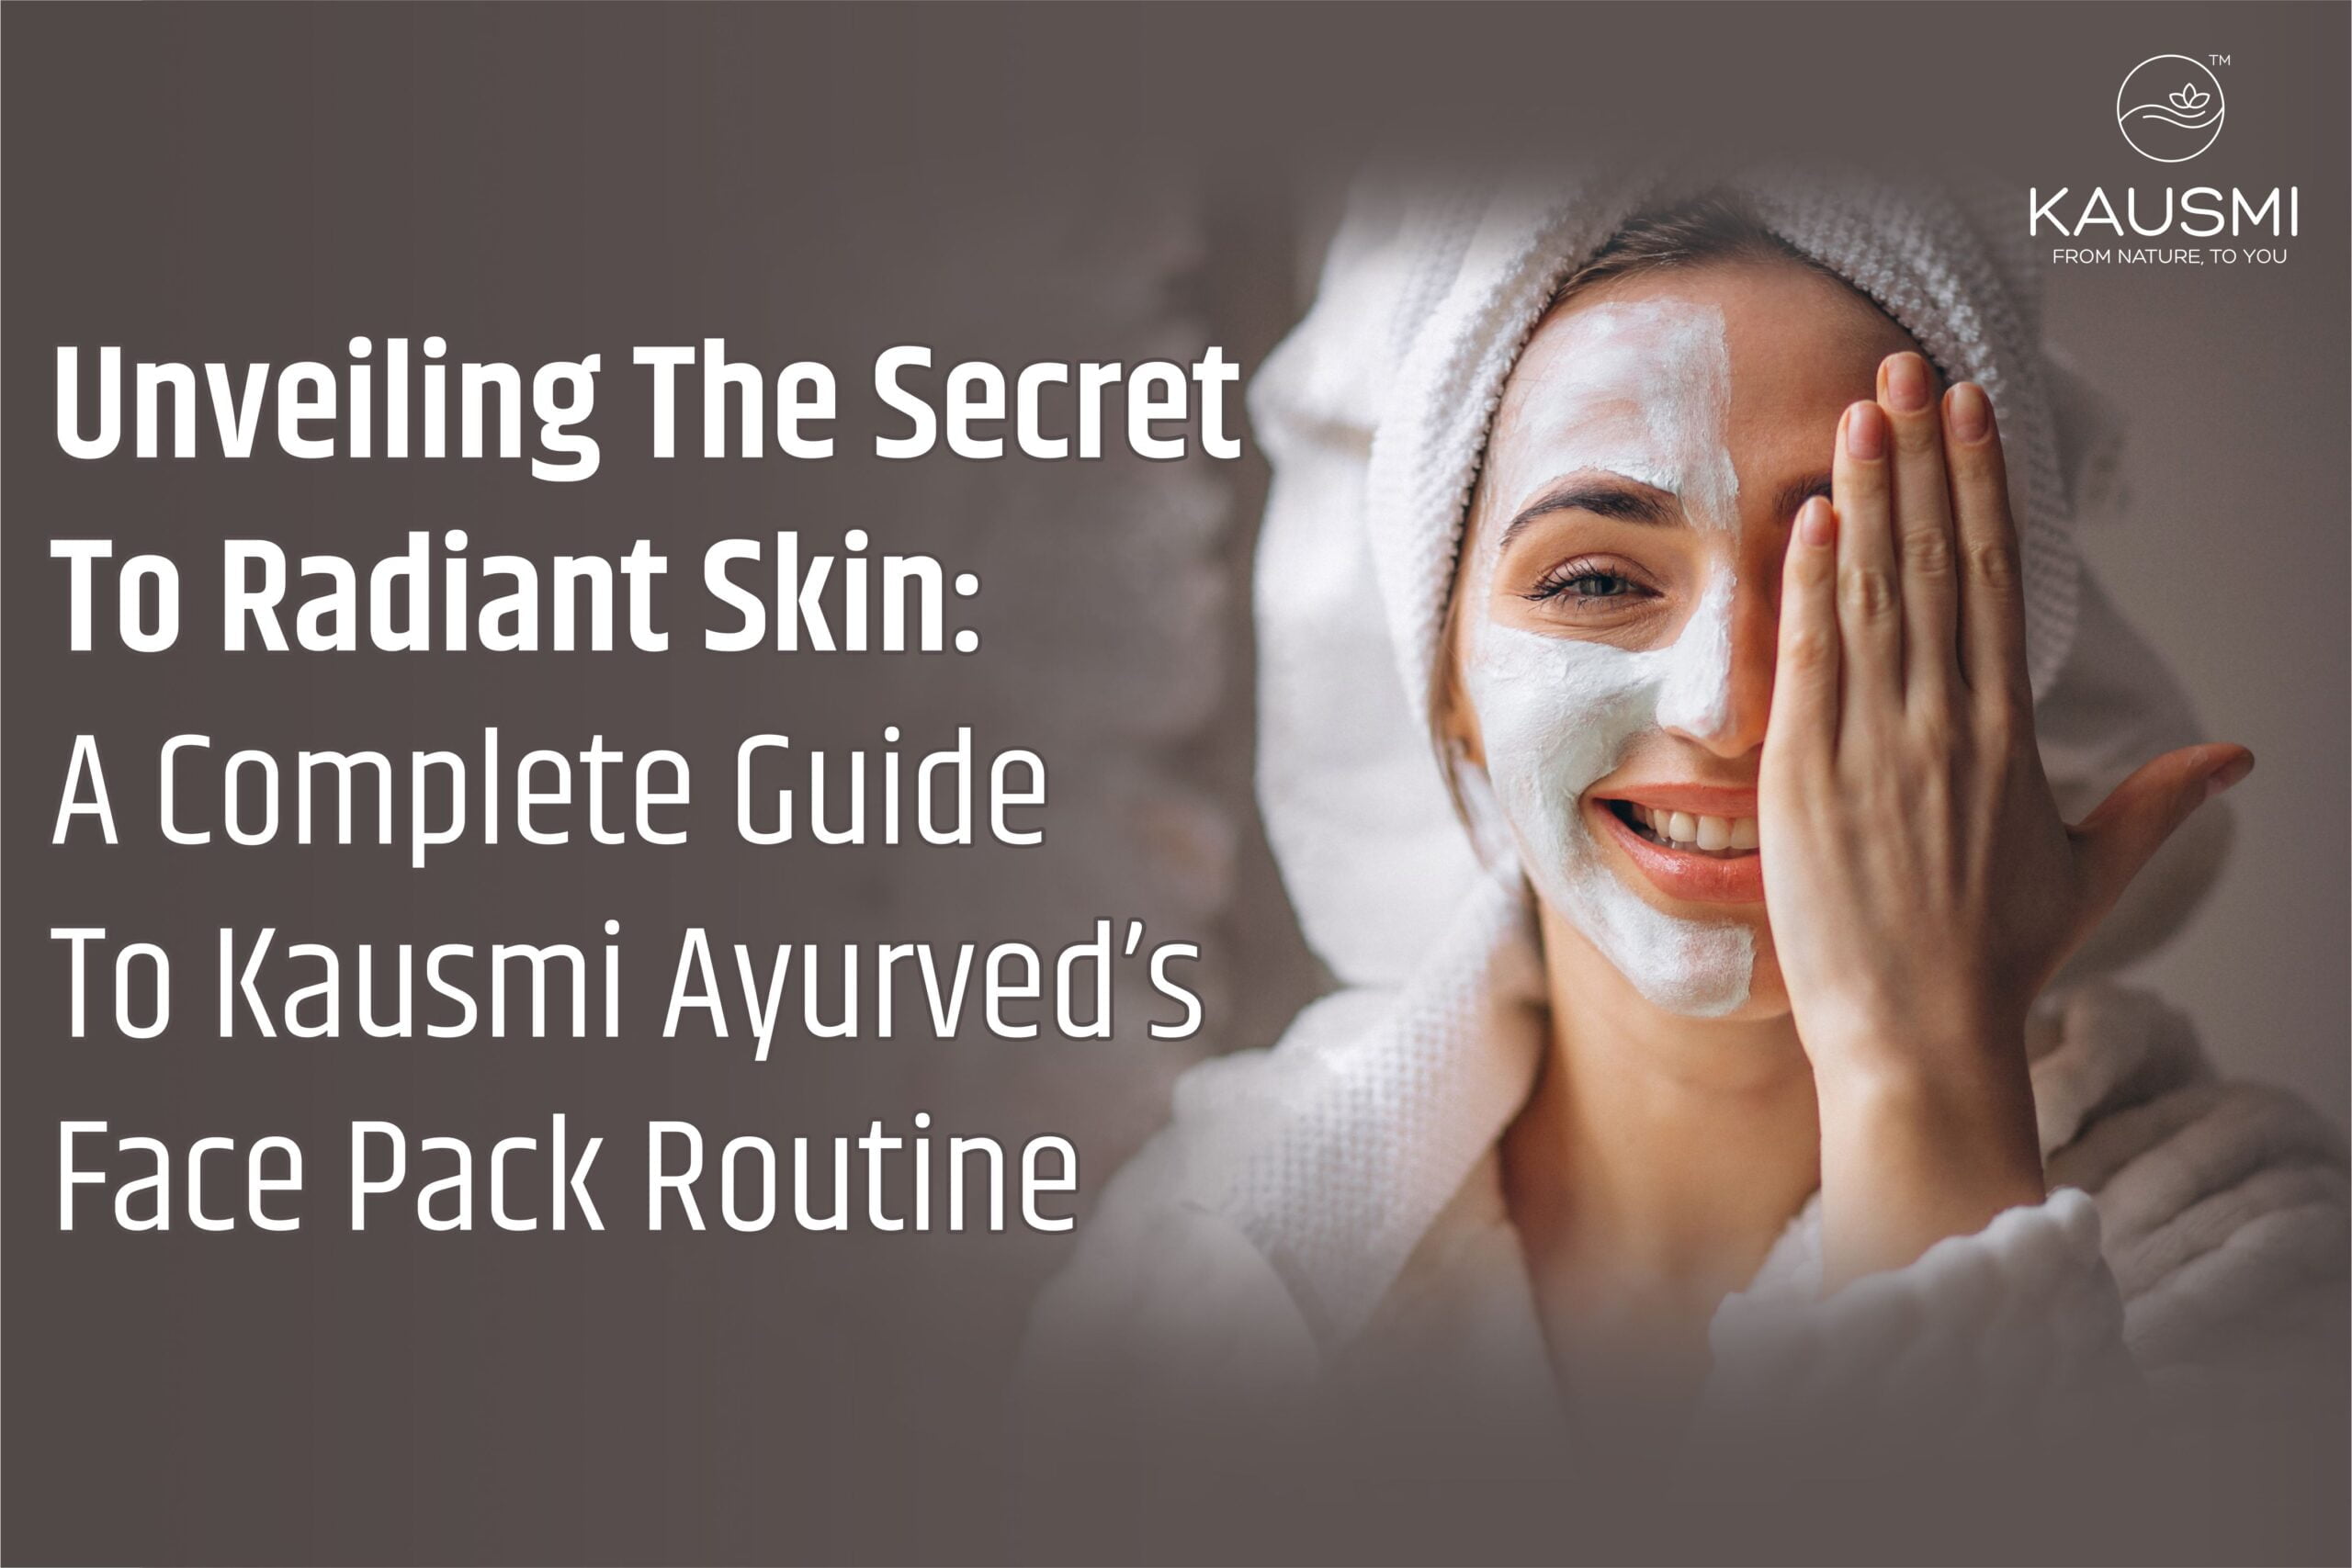 Guide To Kausmi Ayurved’s Face Pack Routine for Brightening skin